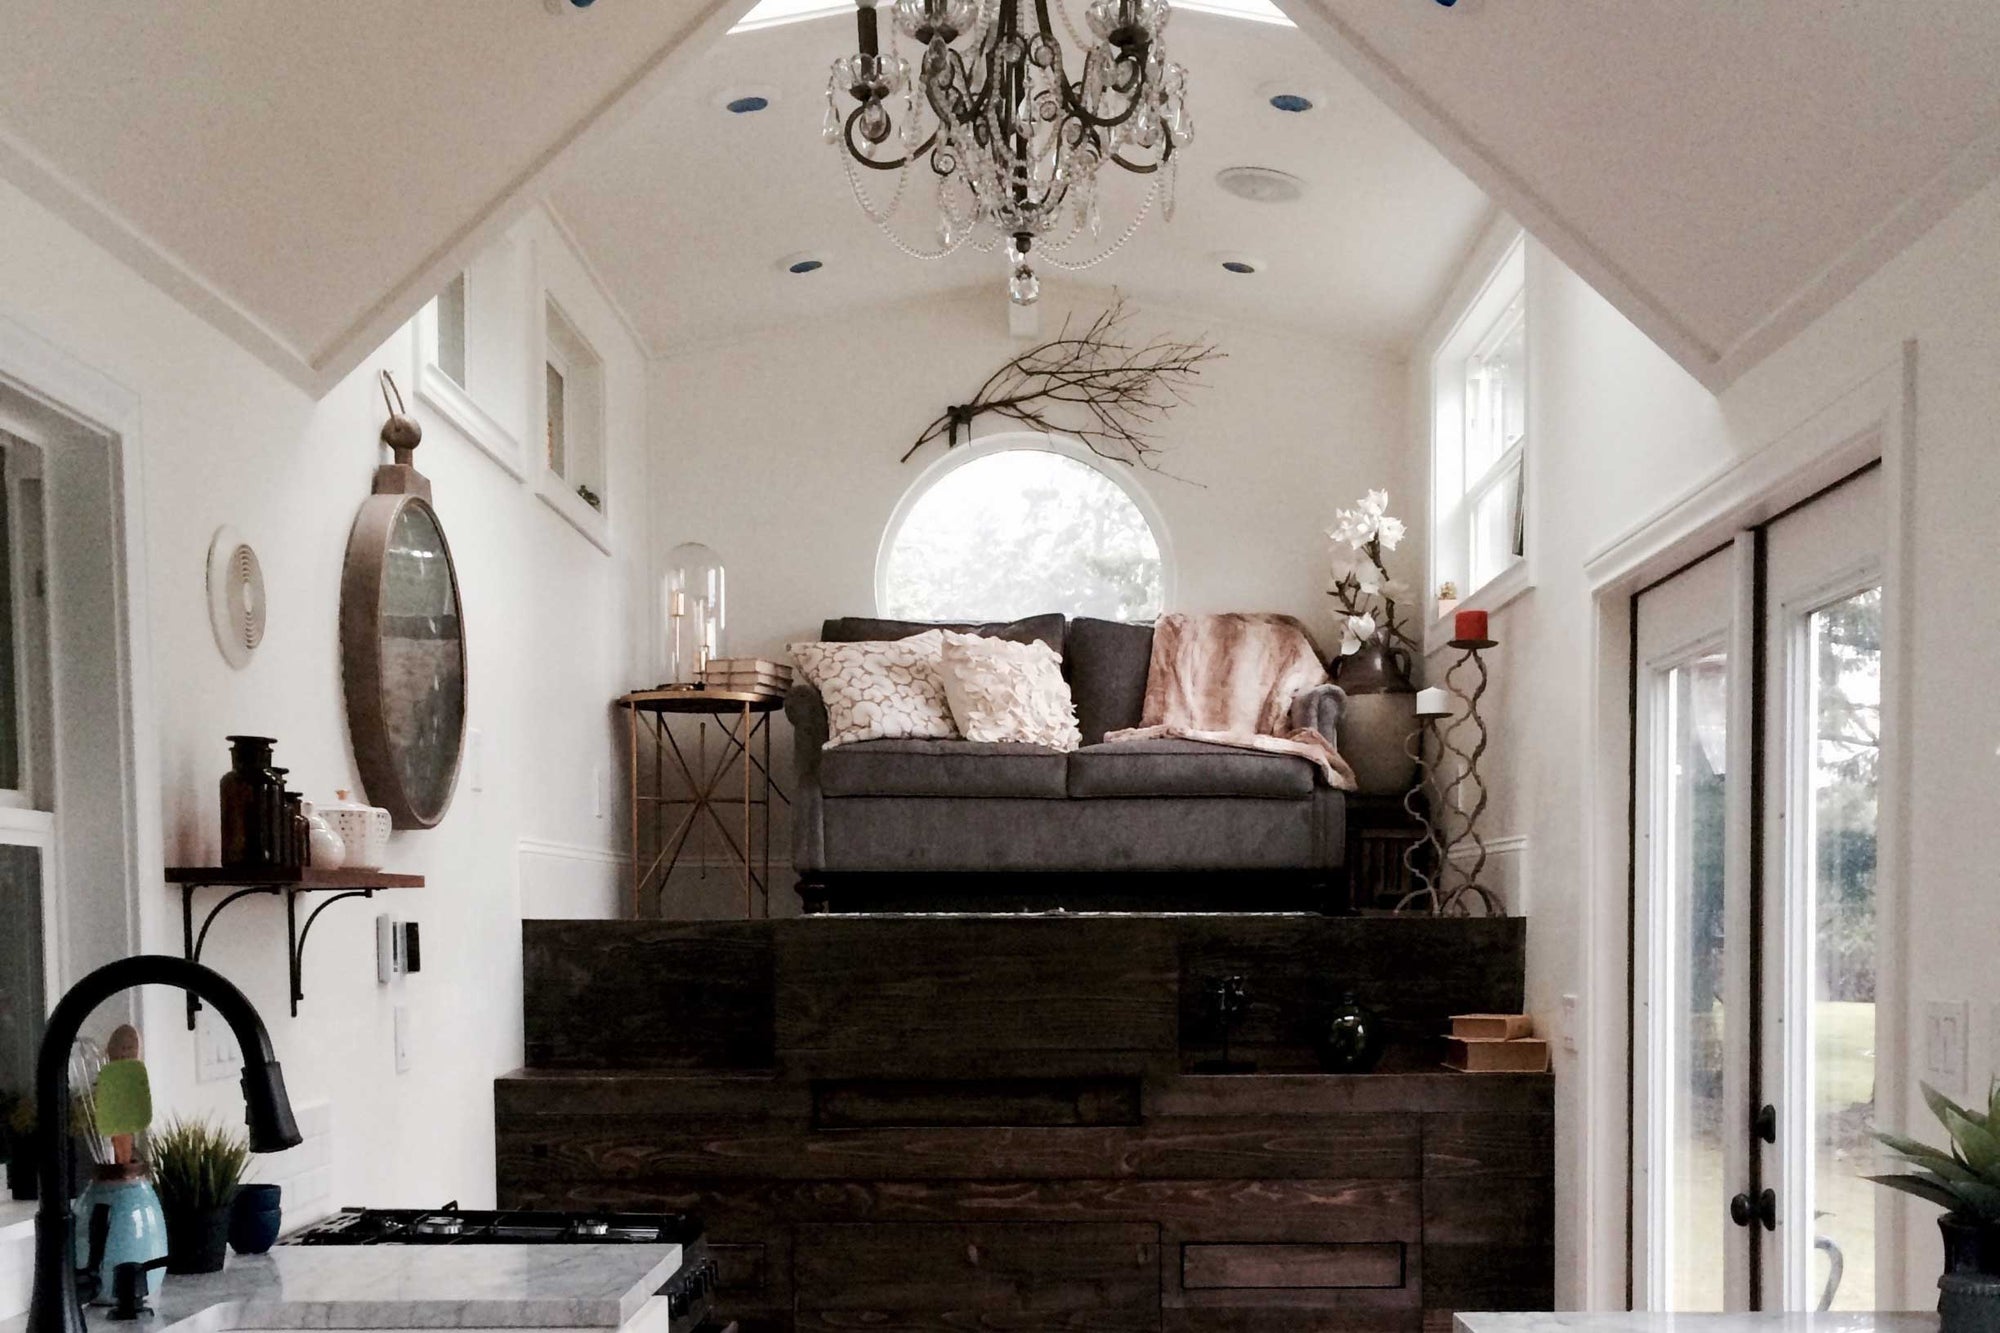 "Vintage Glam" Luxurious Tiny House by Tiny Heirloom